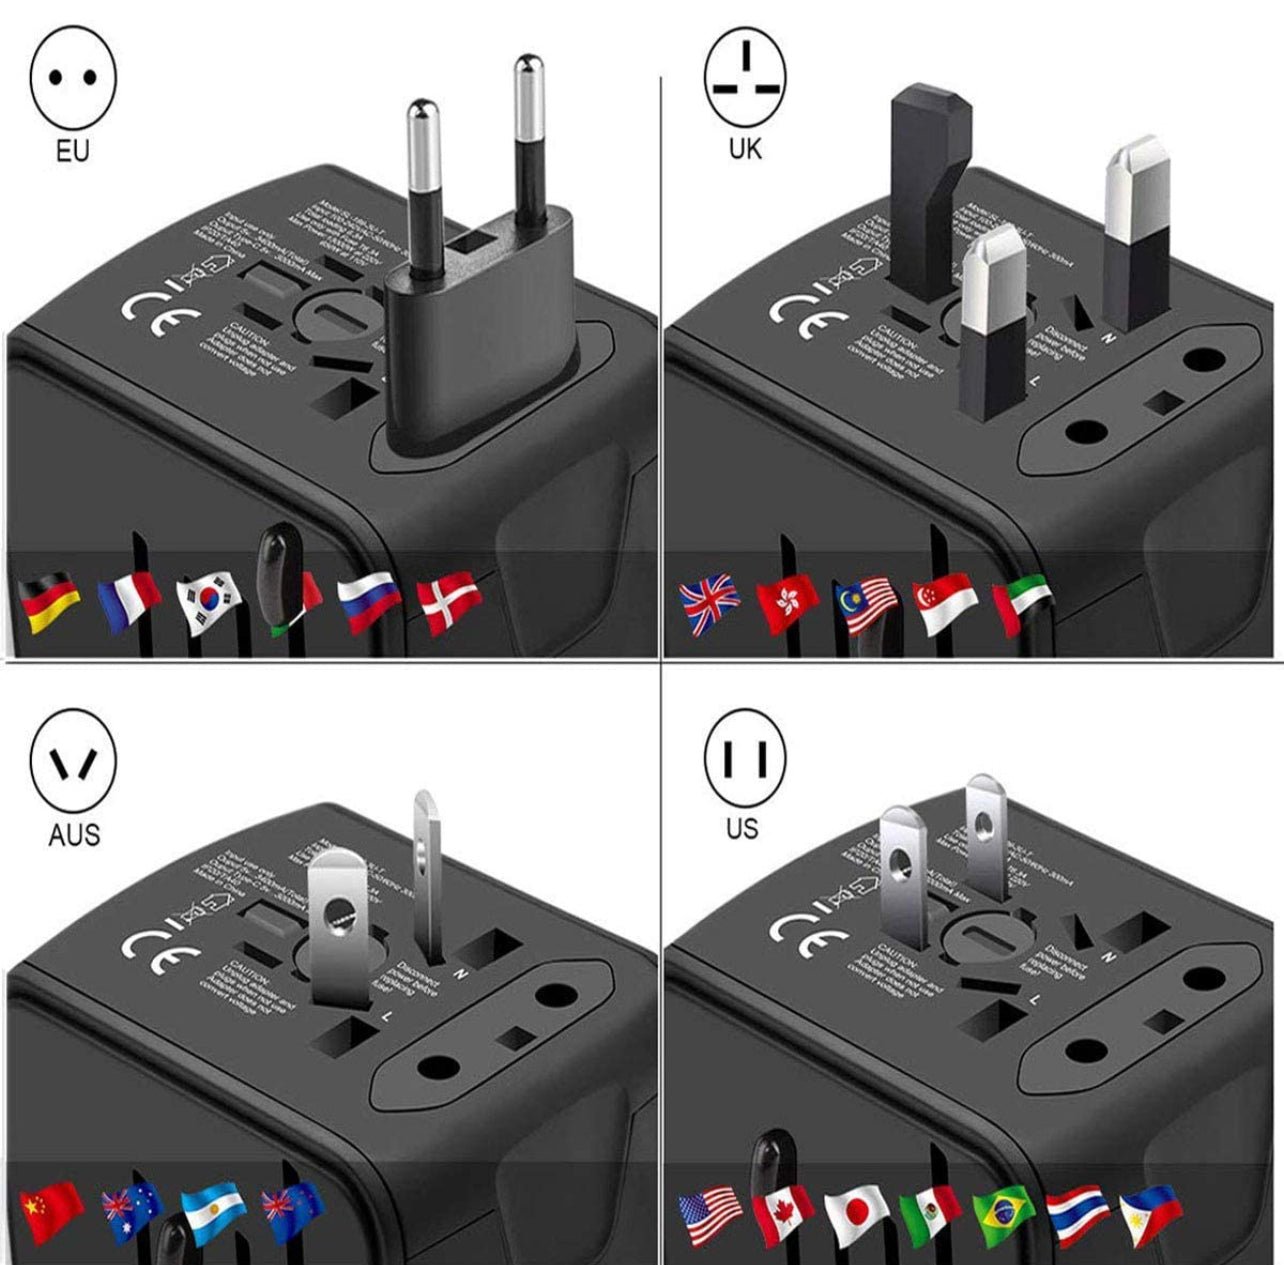 Universal Travel Adapter,International Power Adapter with 3 USB and 1Type C for USA,UK,EU Covers 150+Countries(Black) - MyTravelShop.ca